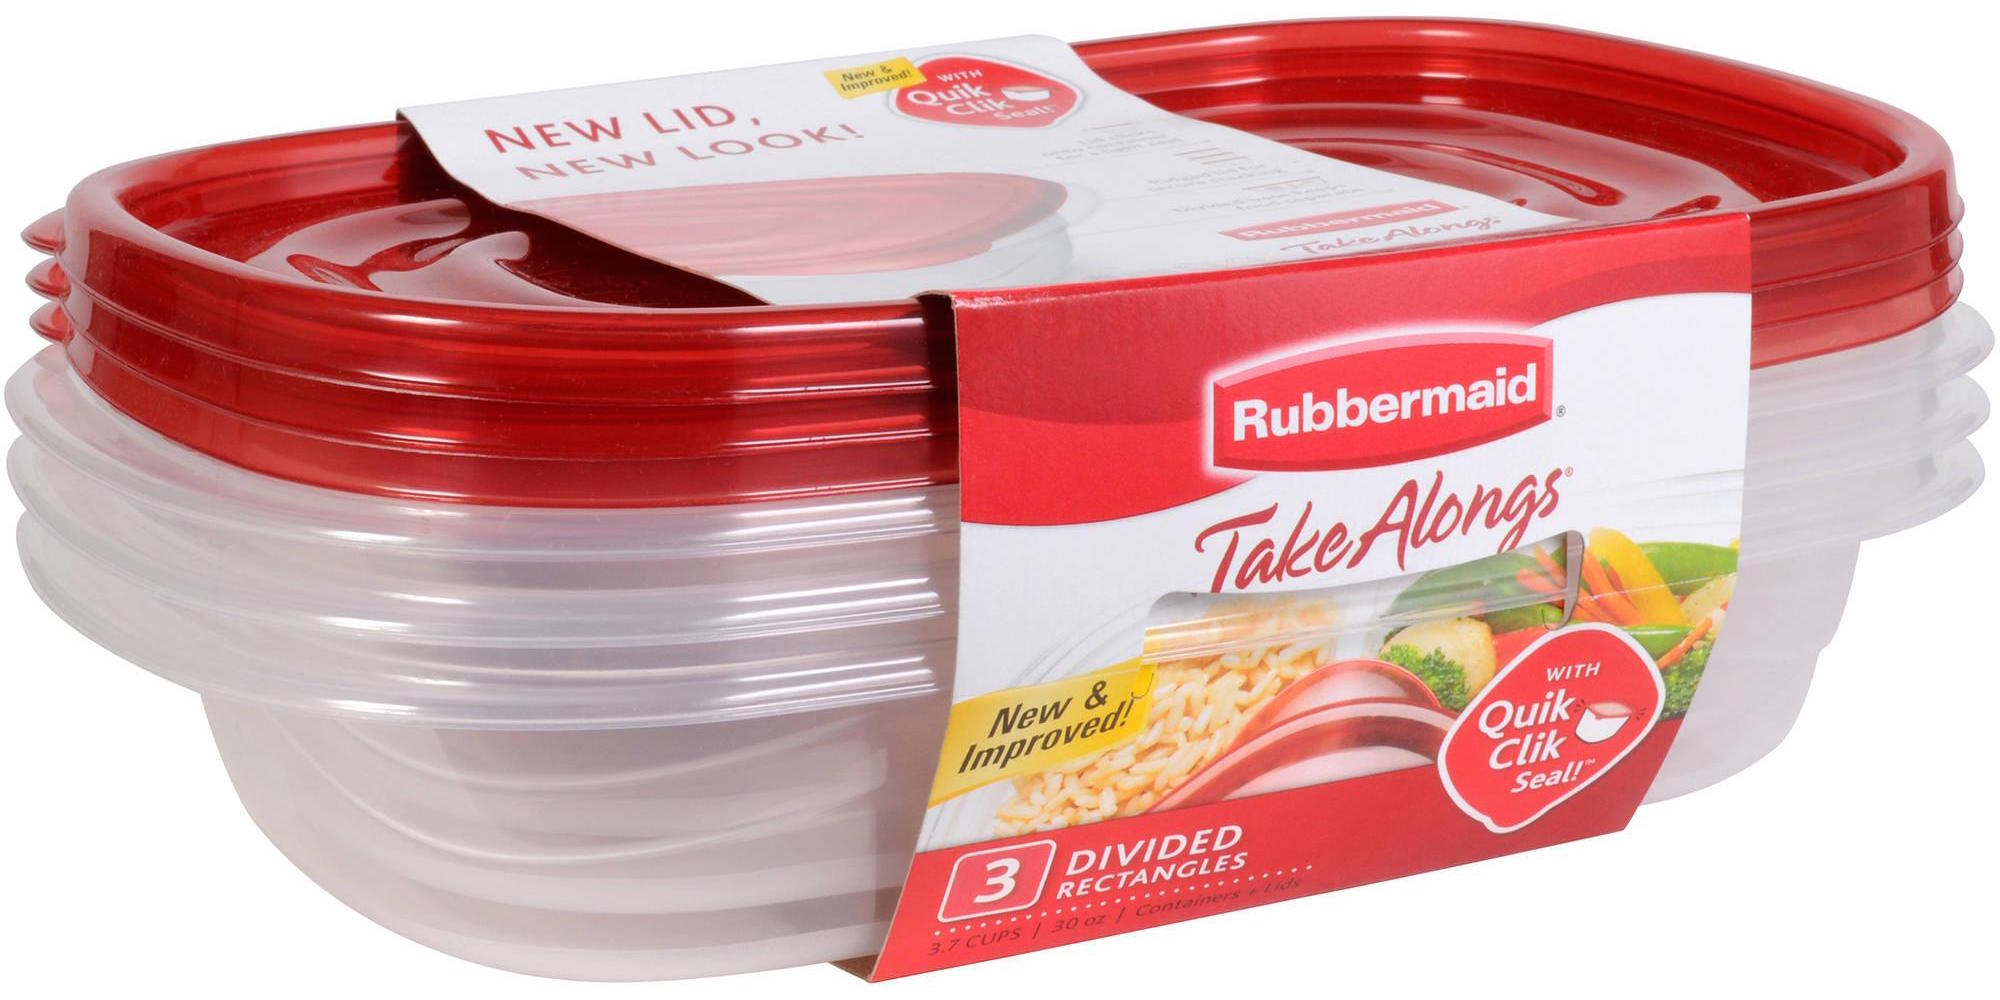 This Set of Rubbermaid Food Storage Containers Is $20 on